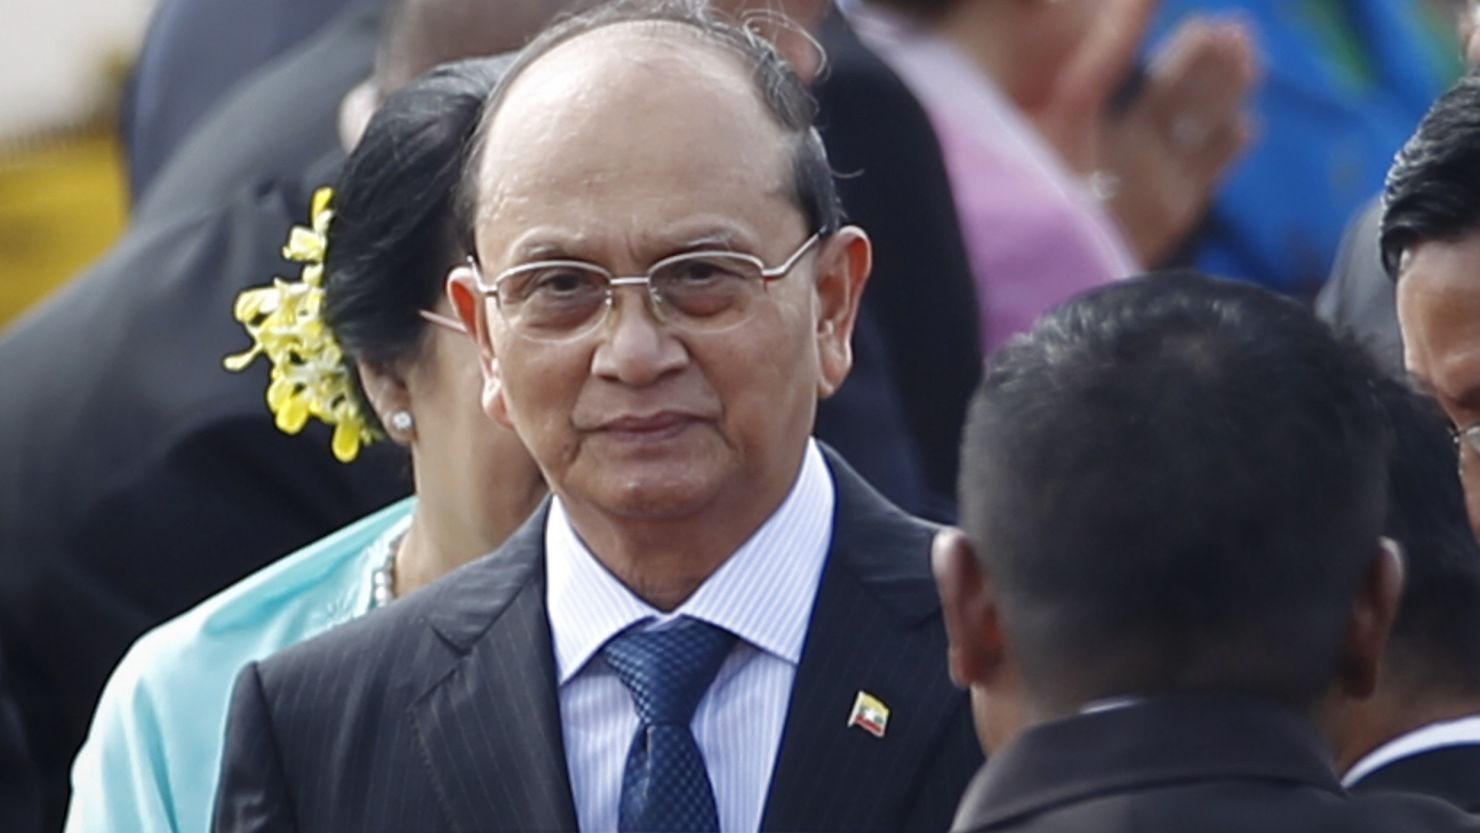 Myanmar President Thein Sein announced in July that Myanmar will have no political prisoners by the end of this year.